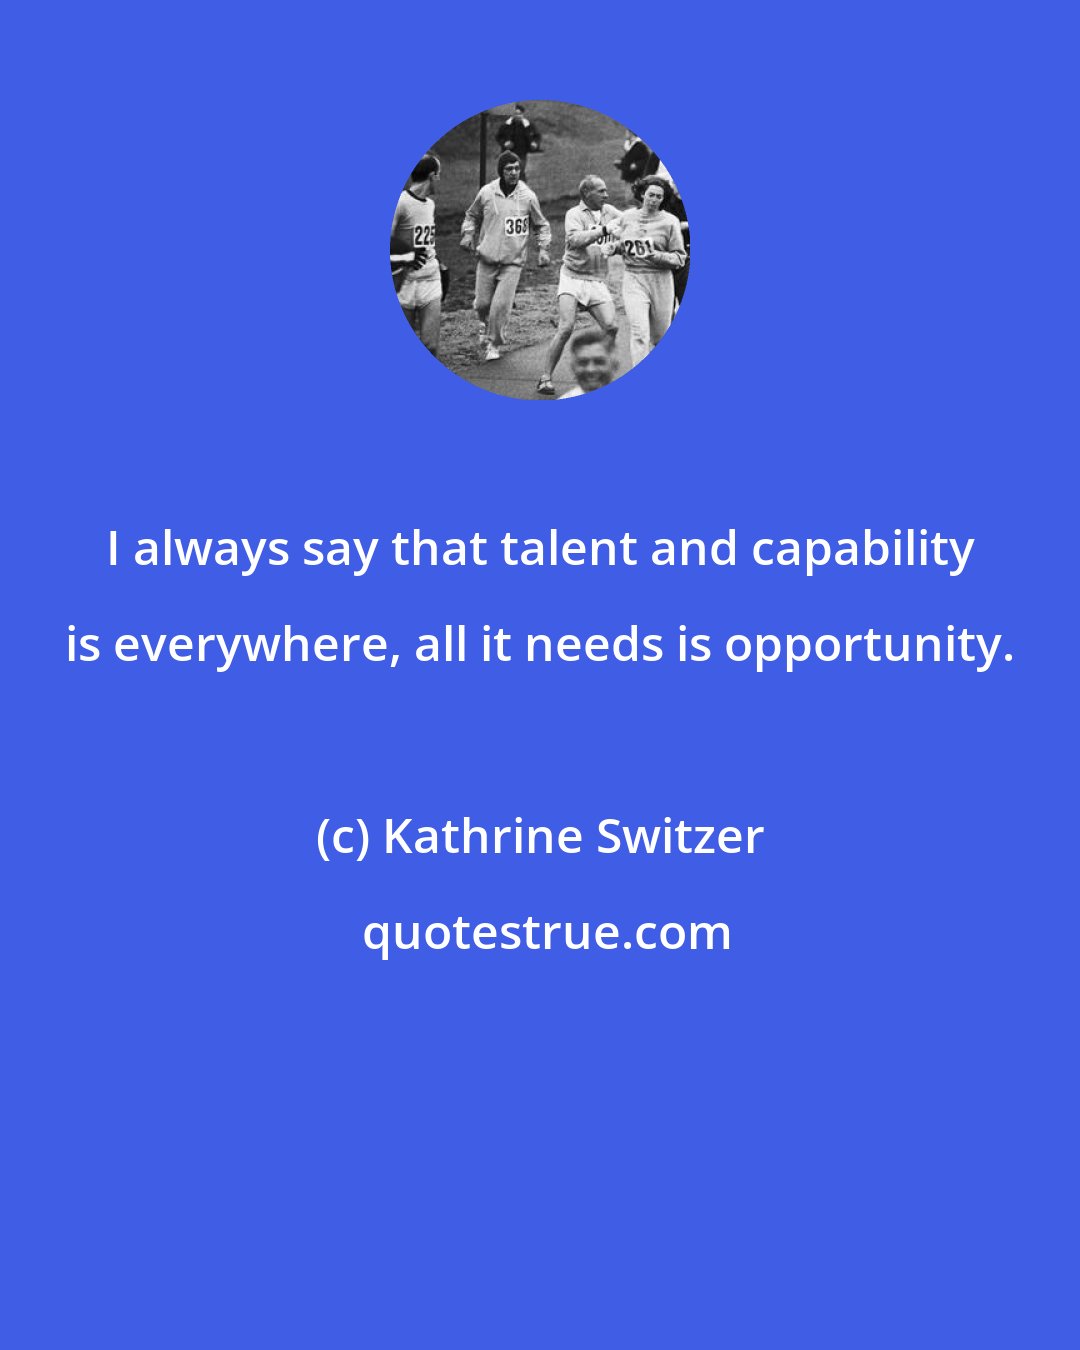 Kathrine Switzer: I always say that talent and capability is everywhere, all it needs is opportunity.